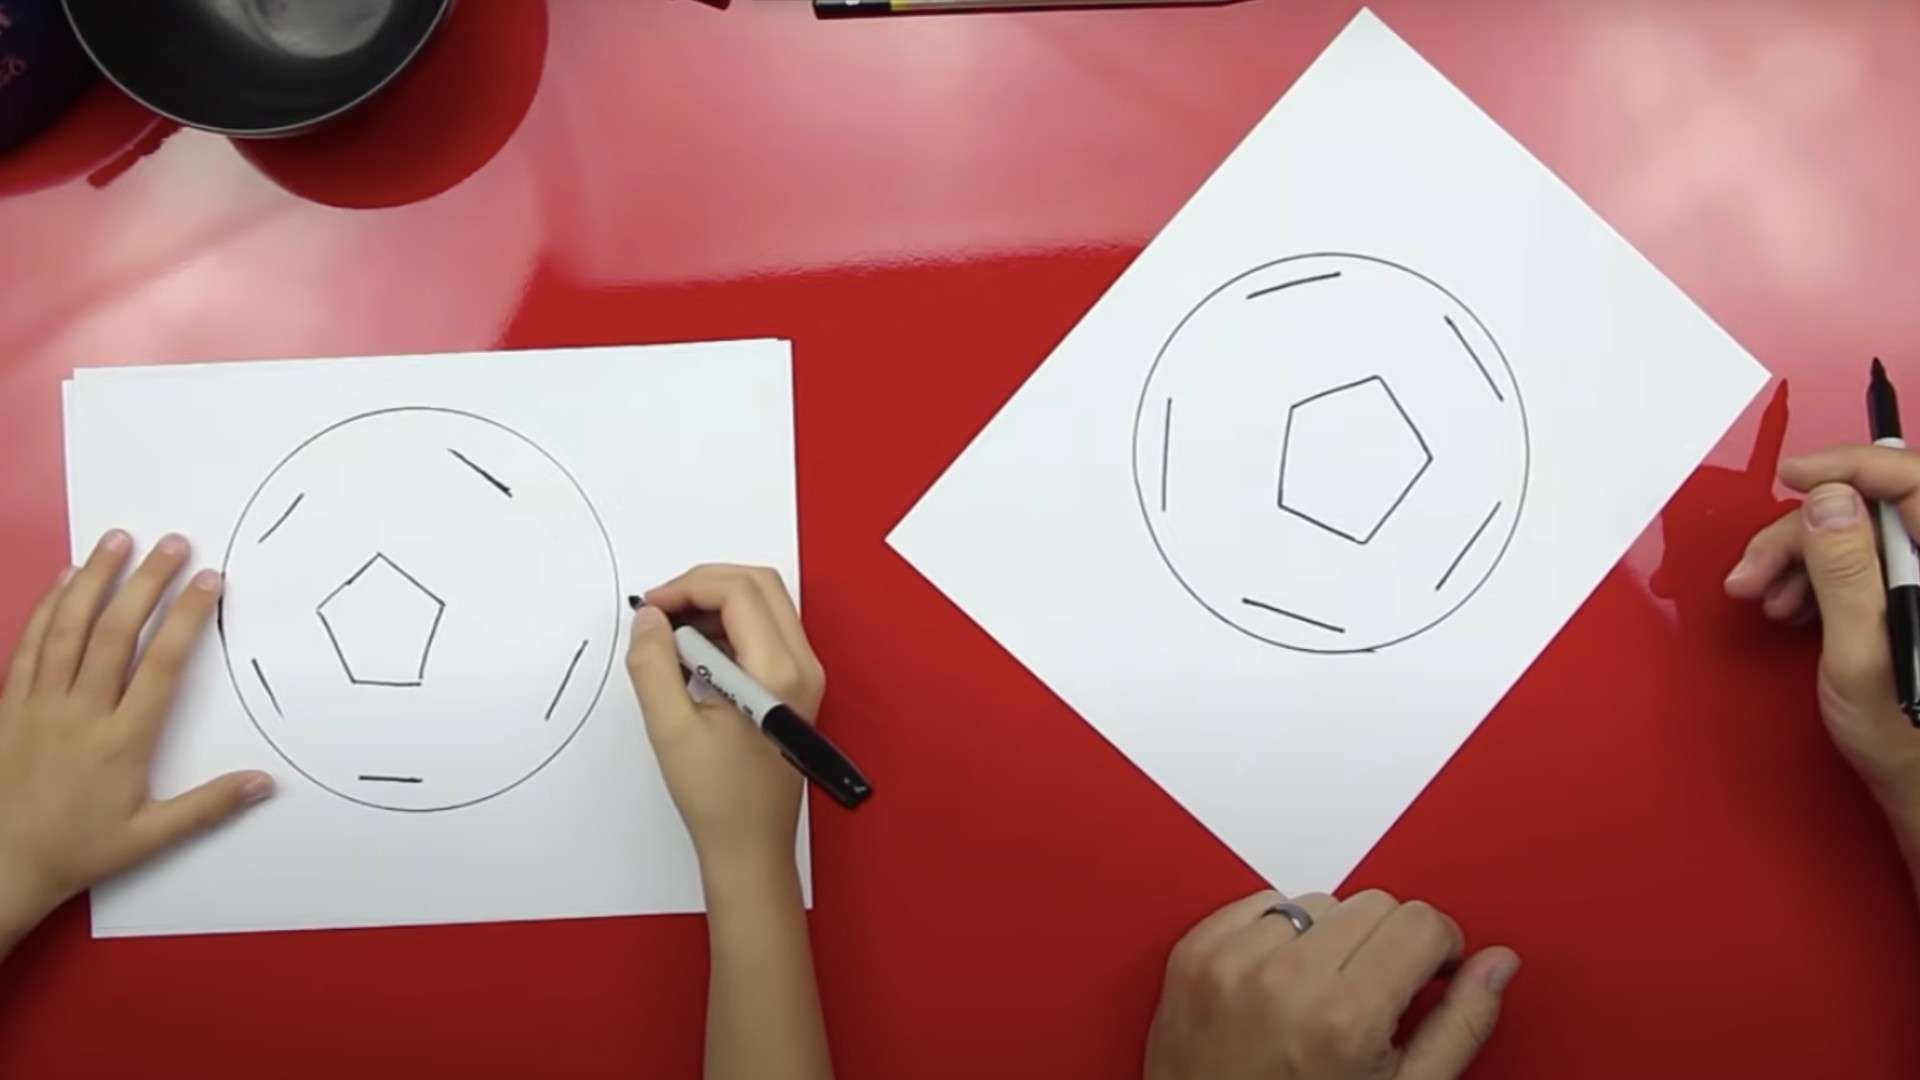 How to draw soccer ball 3